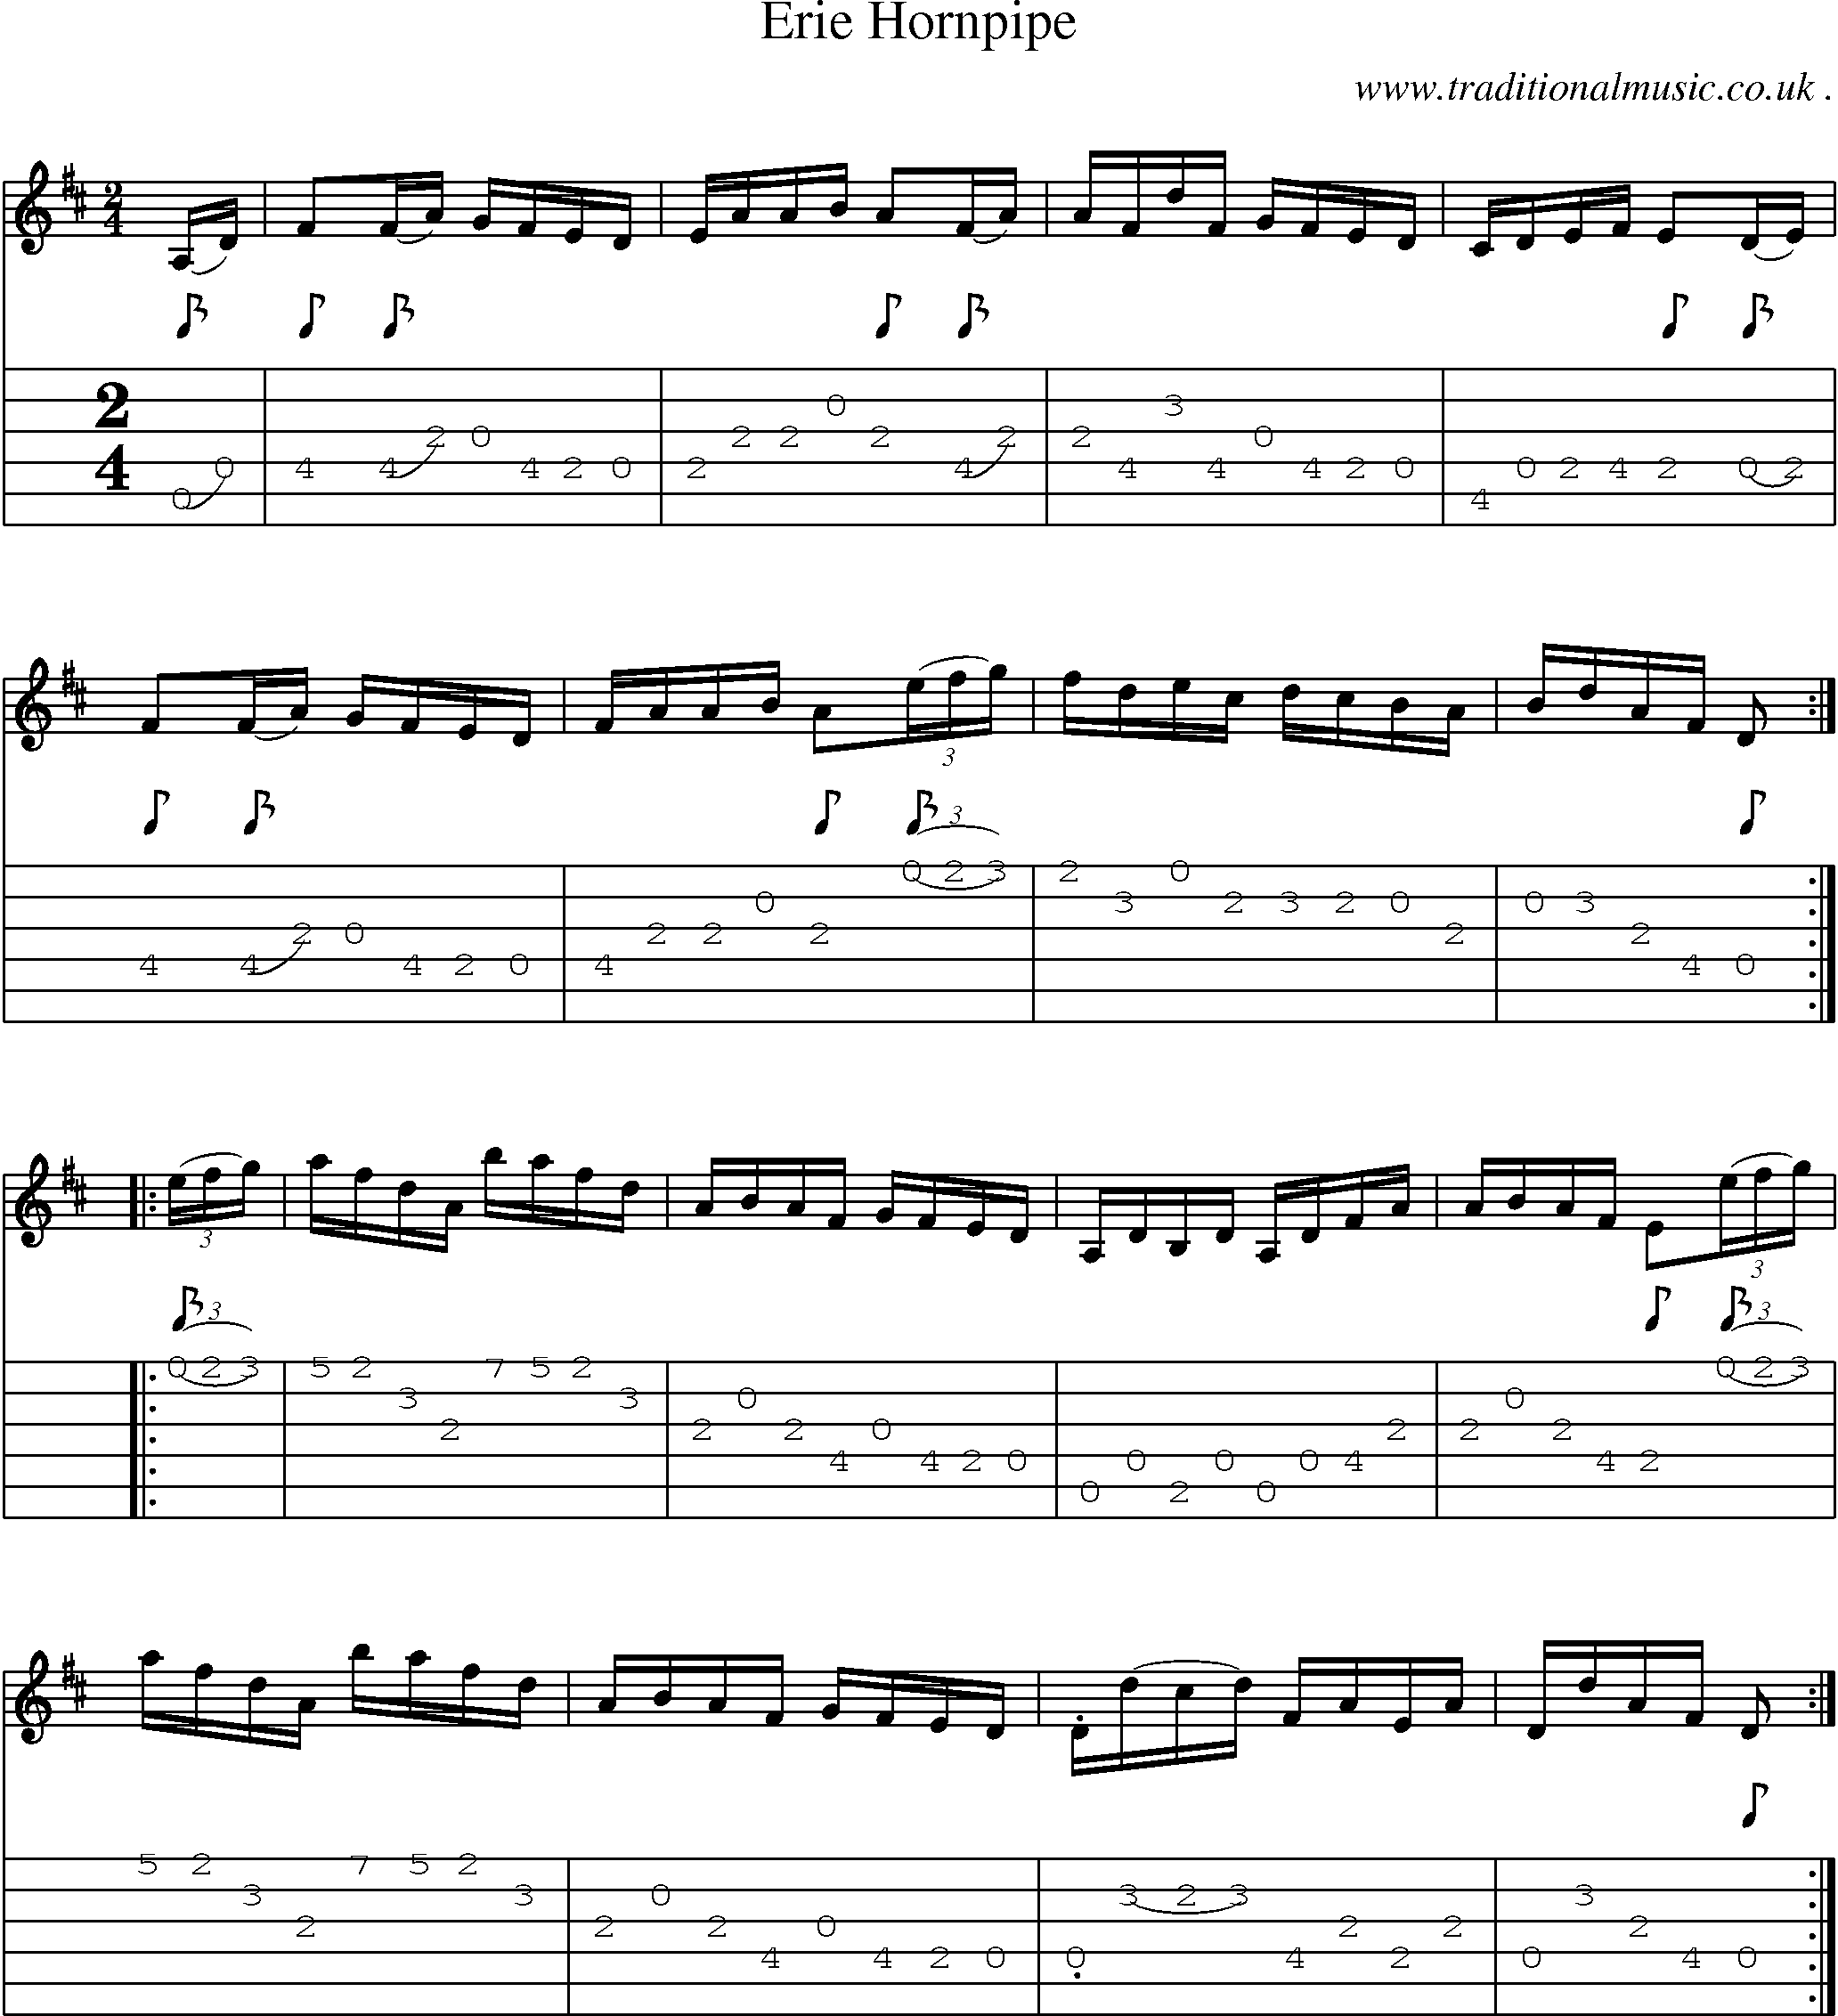 Sheet-Music and Guitar Tabs for Erie Hornpipe